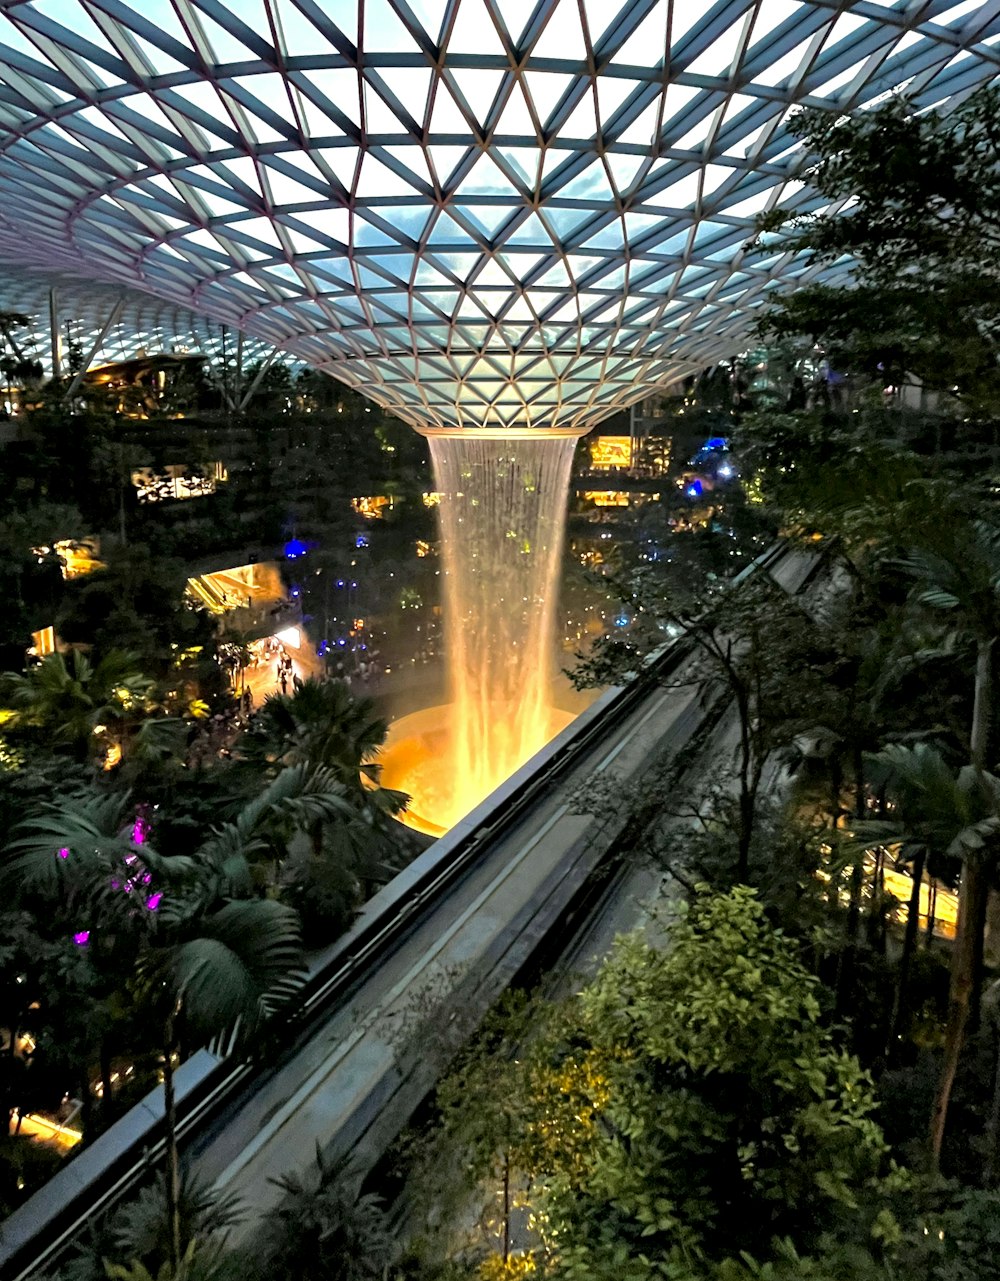 a view of the inside of a building with a fountain